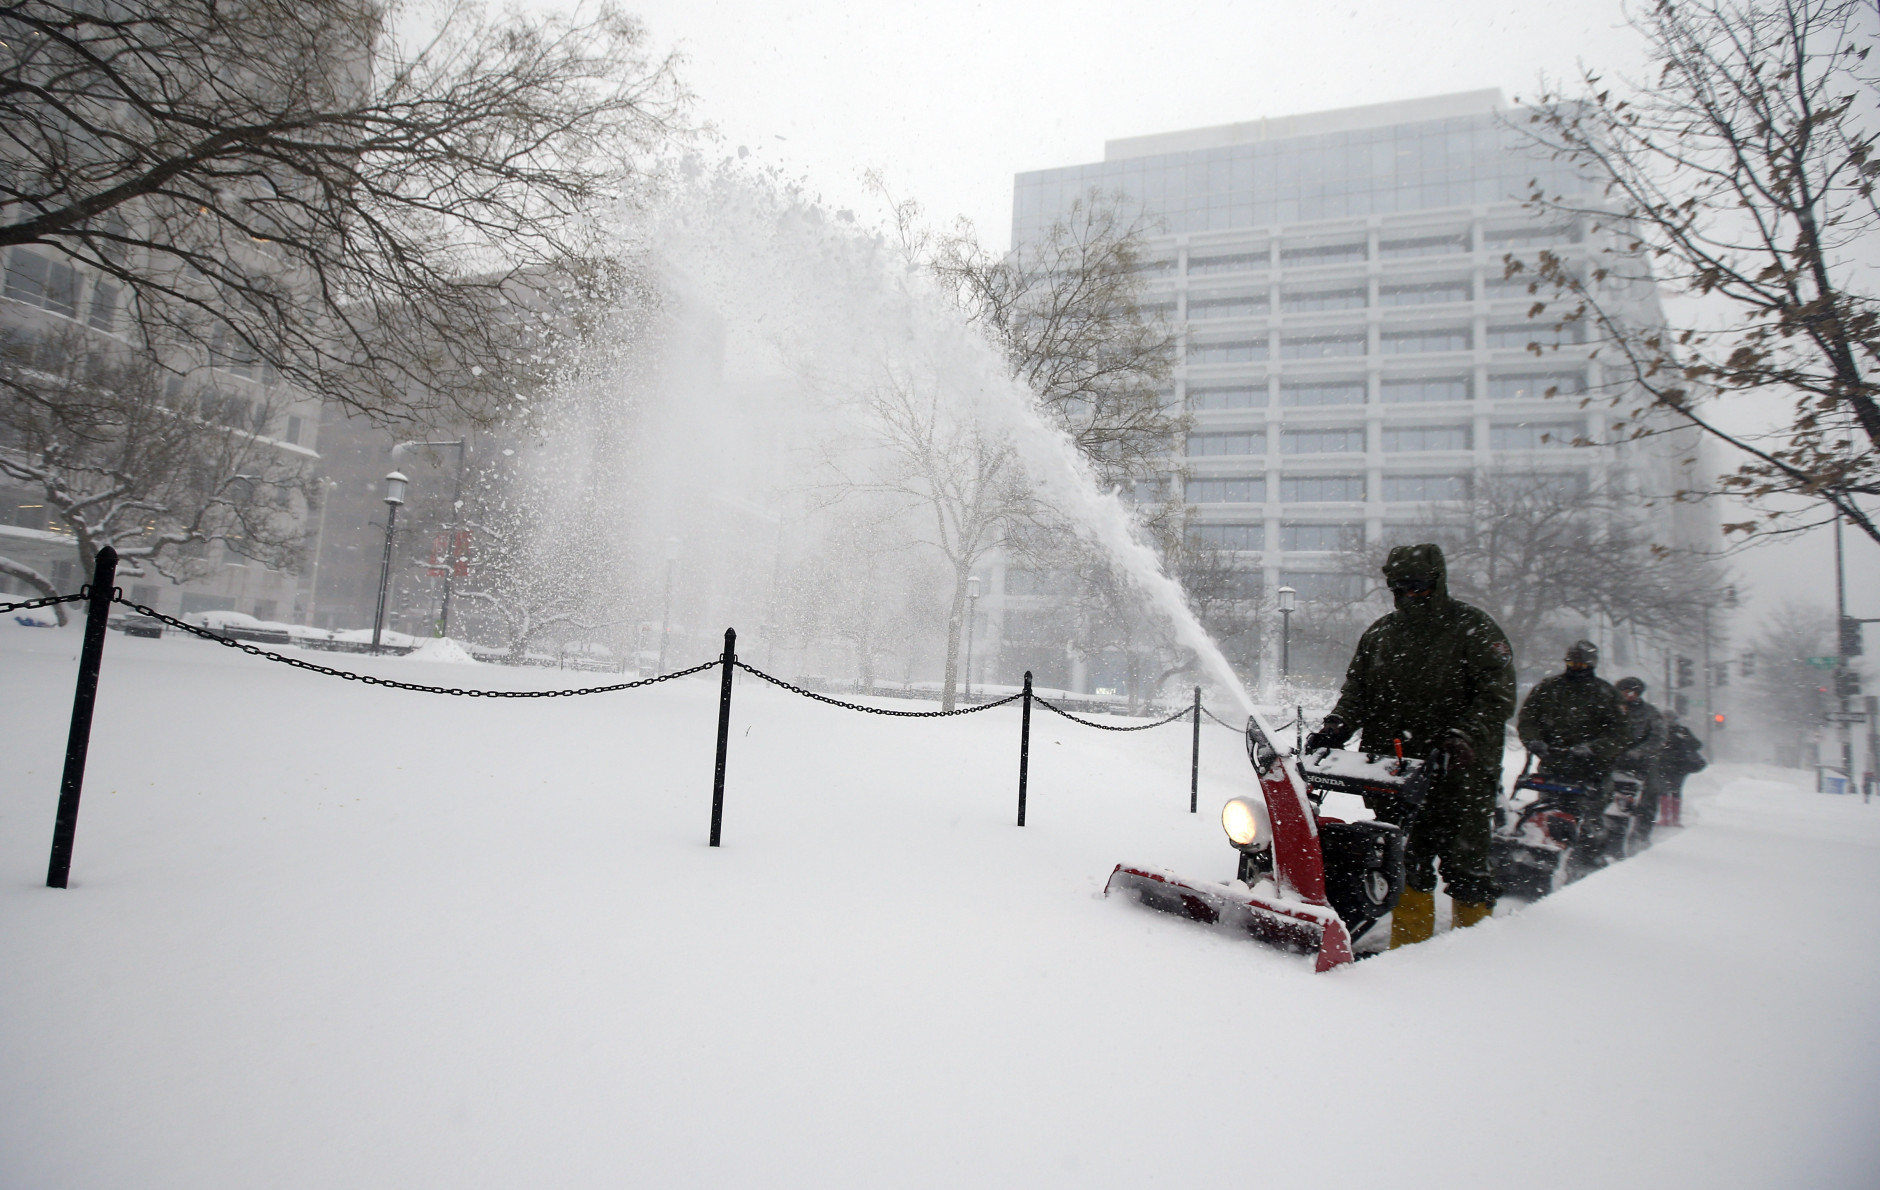 U.S. Park Service employees use snow blowers to clear the sidewalk of Edward R. Murrow park, Saturday, Jan. 23, 2016 in Washington. A blizzard with hurricane-force winds brought much of the East Coast to a standstill Saturday, dumping as much as 3 feet of snow, stranding tens of thousands of travelers and shutting down the nation's capital and its largest city. (AP Photo/Alex Brandon)